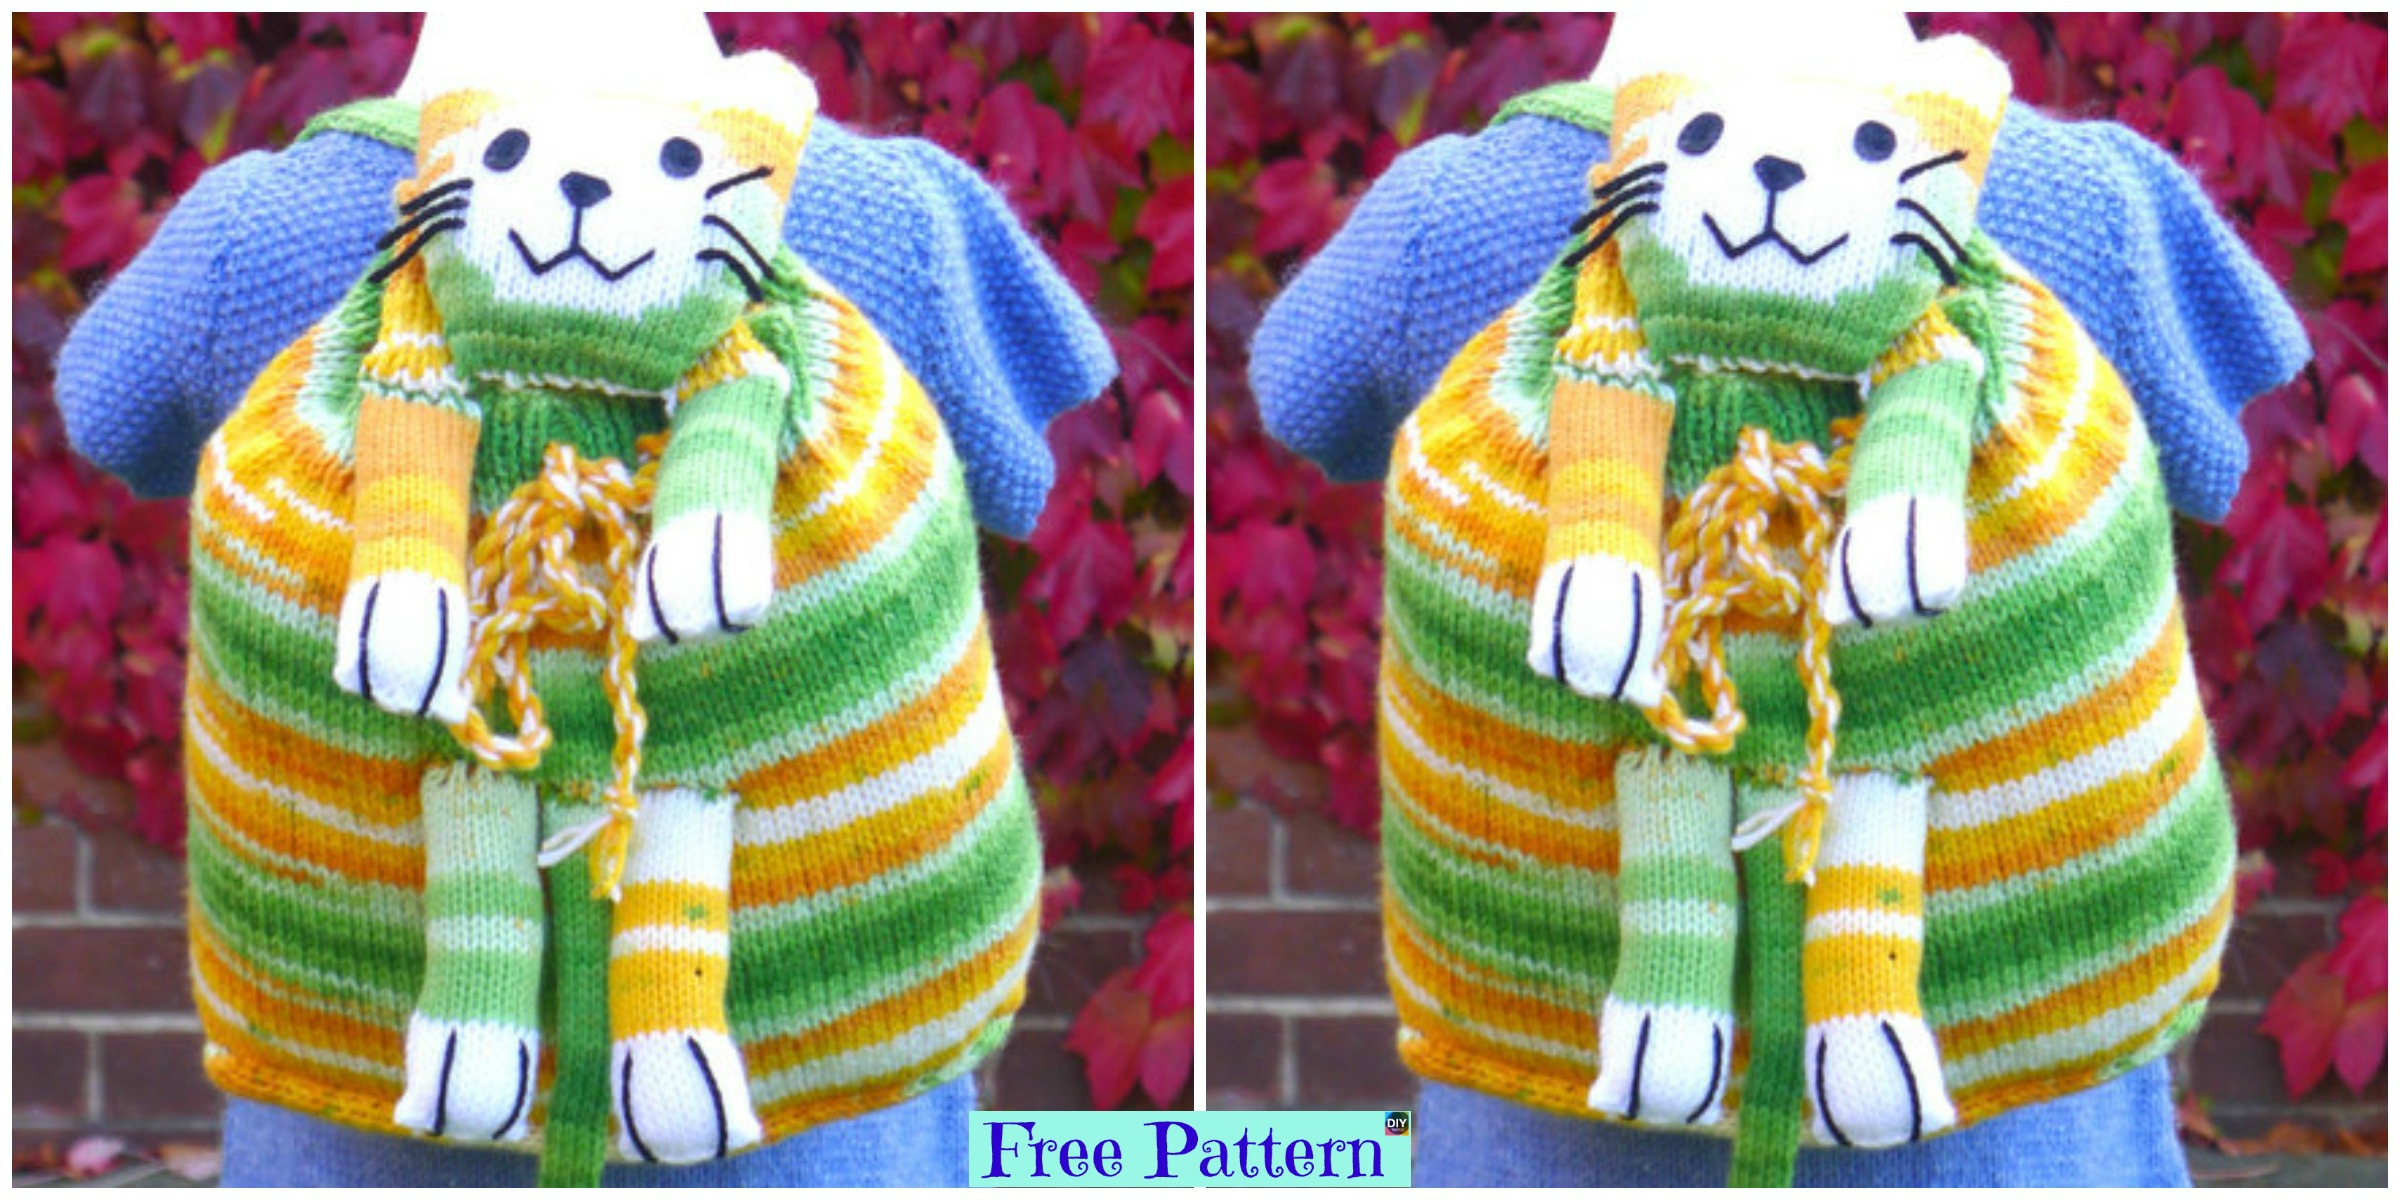 Adorable Knit Kids’ Backpack – Free Pattern